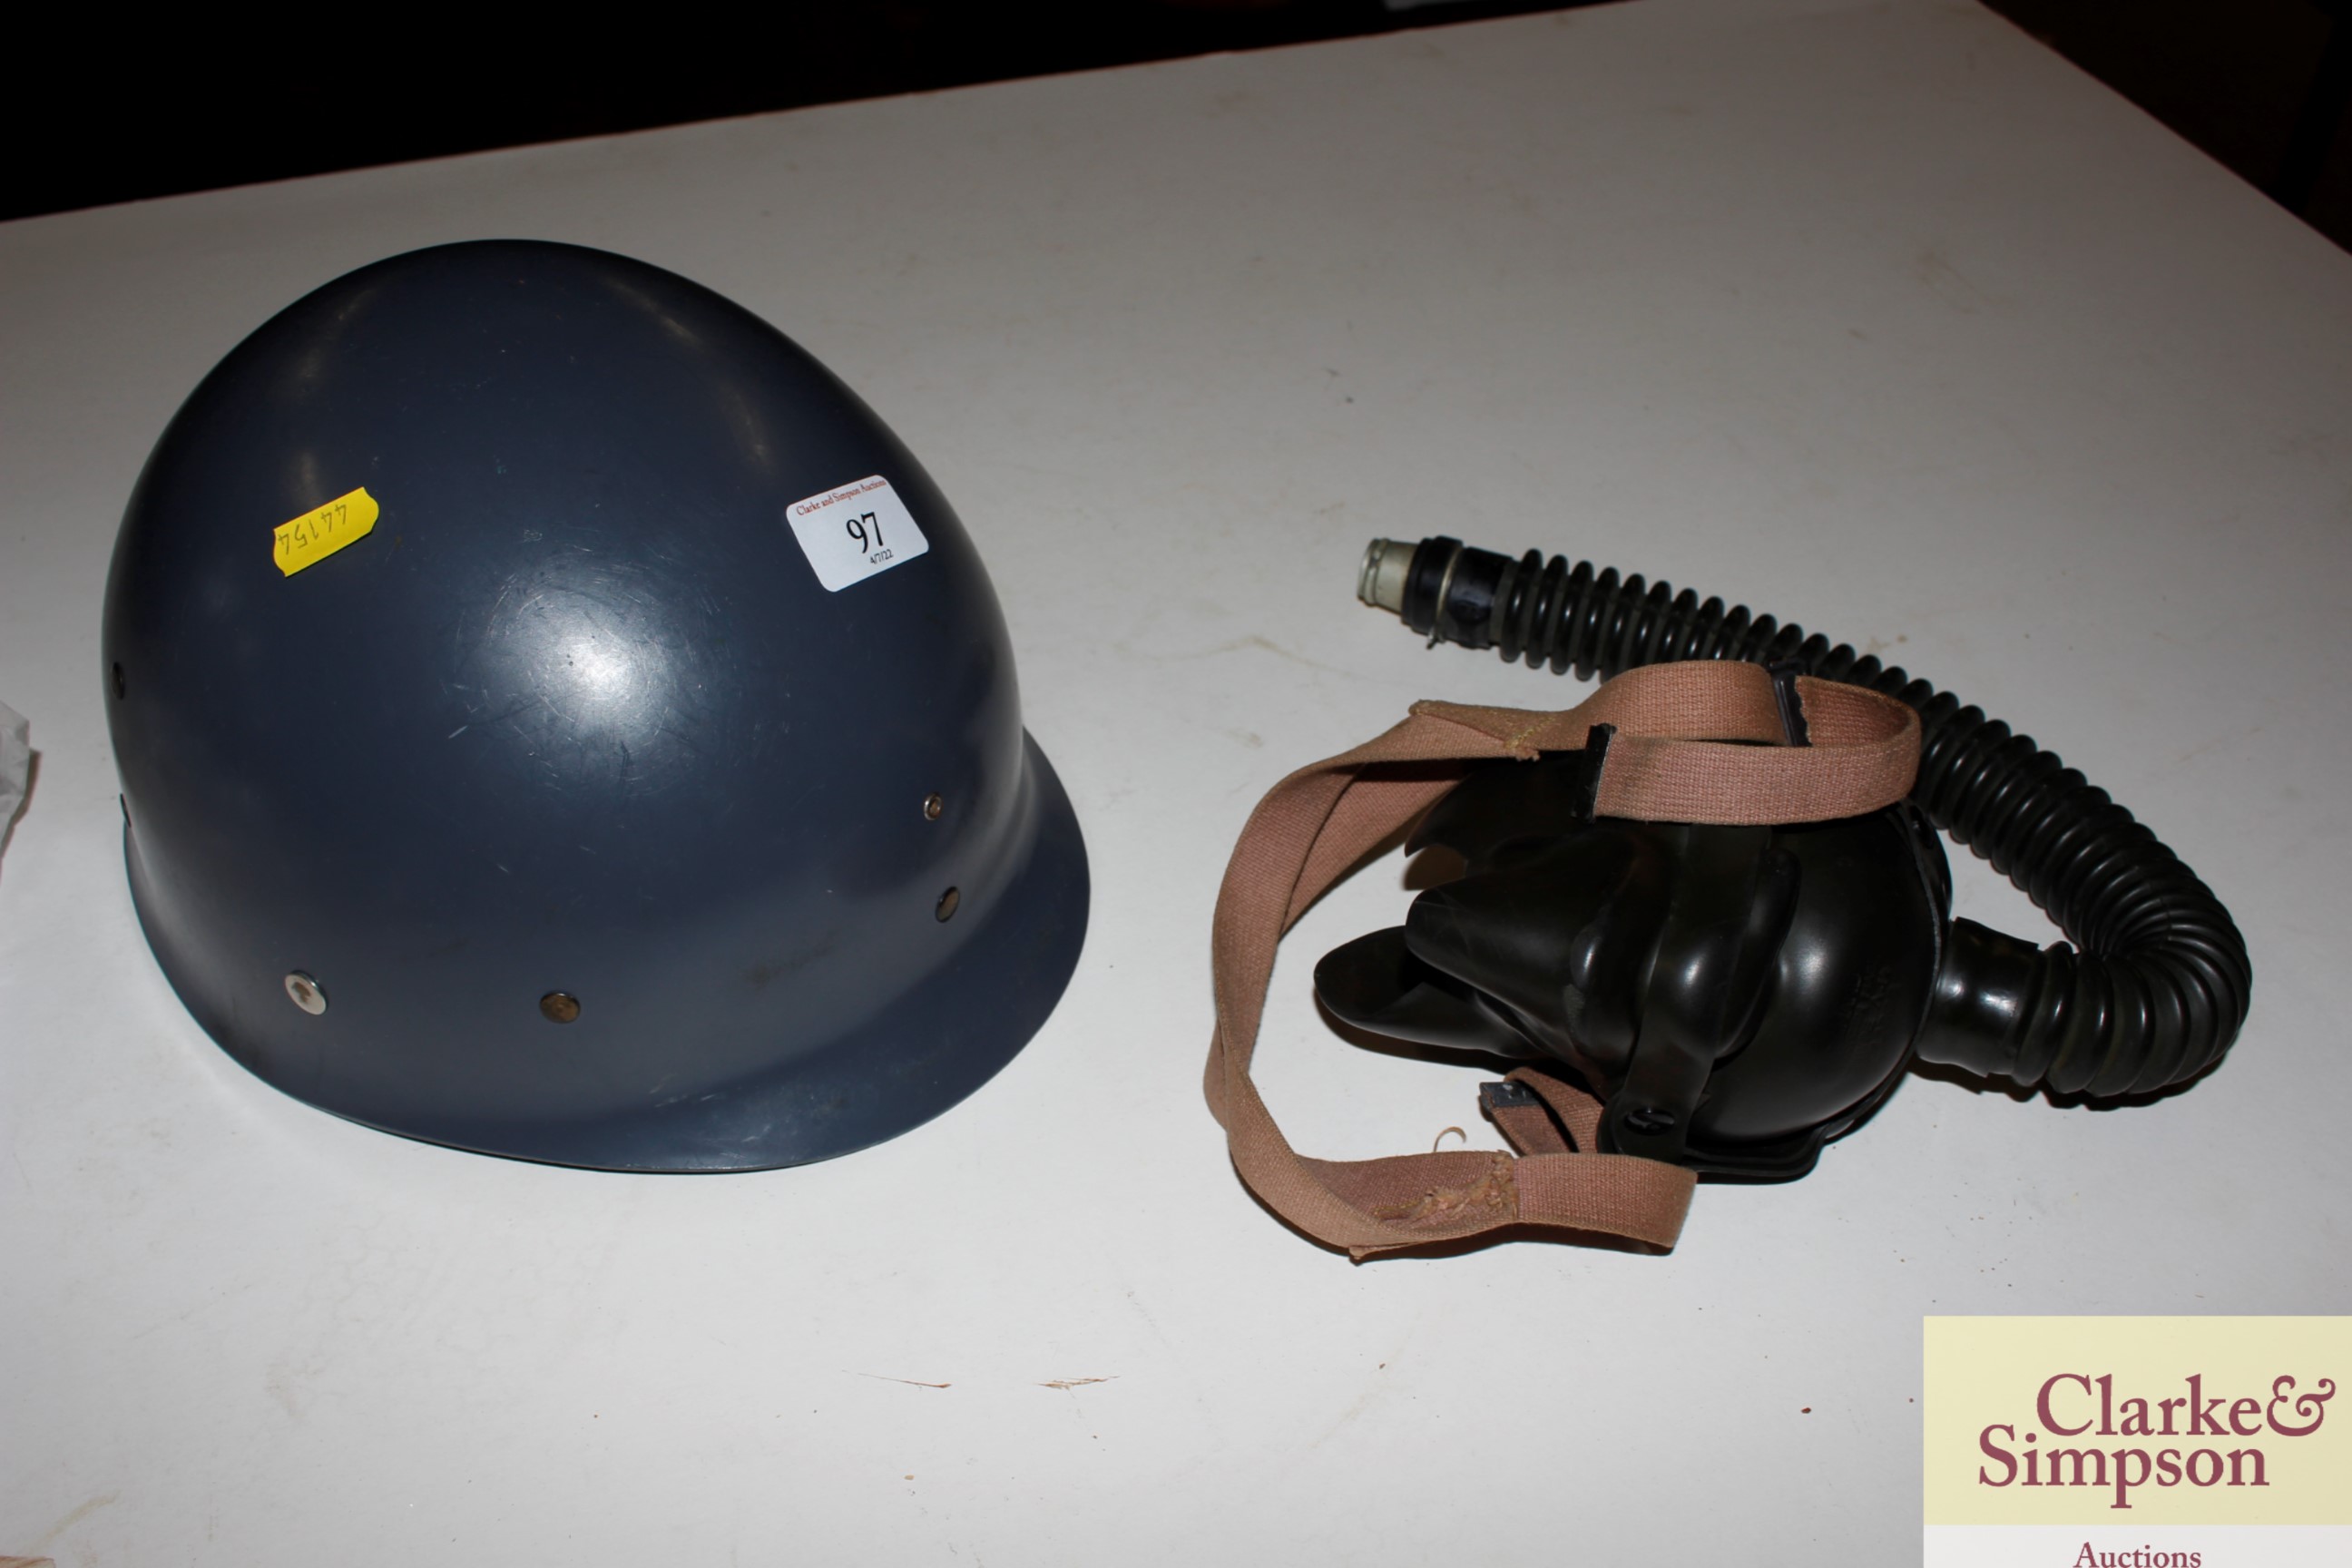 A USAAF pilots oxygen mask; and a military helmet